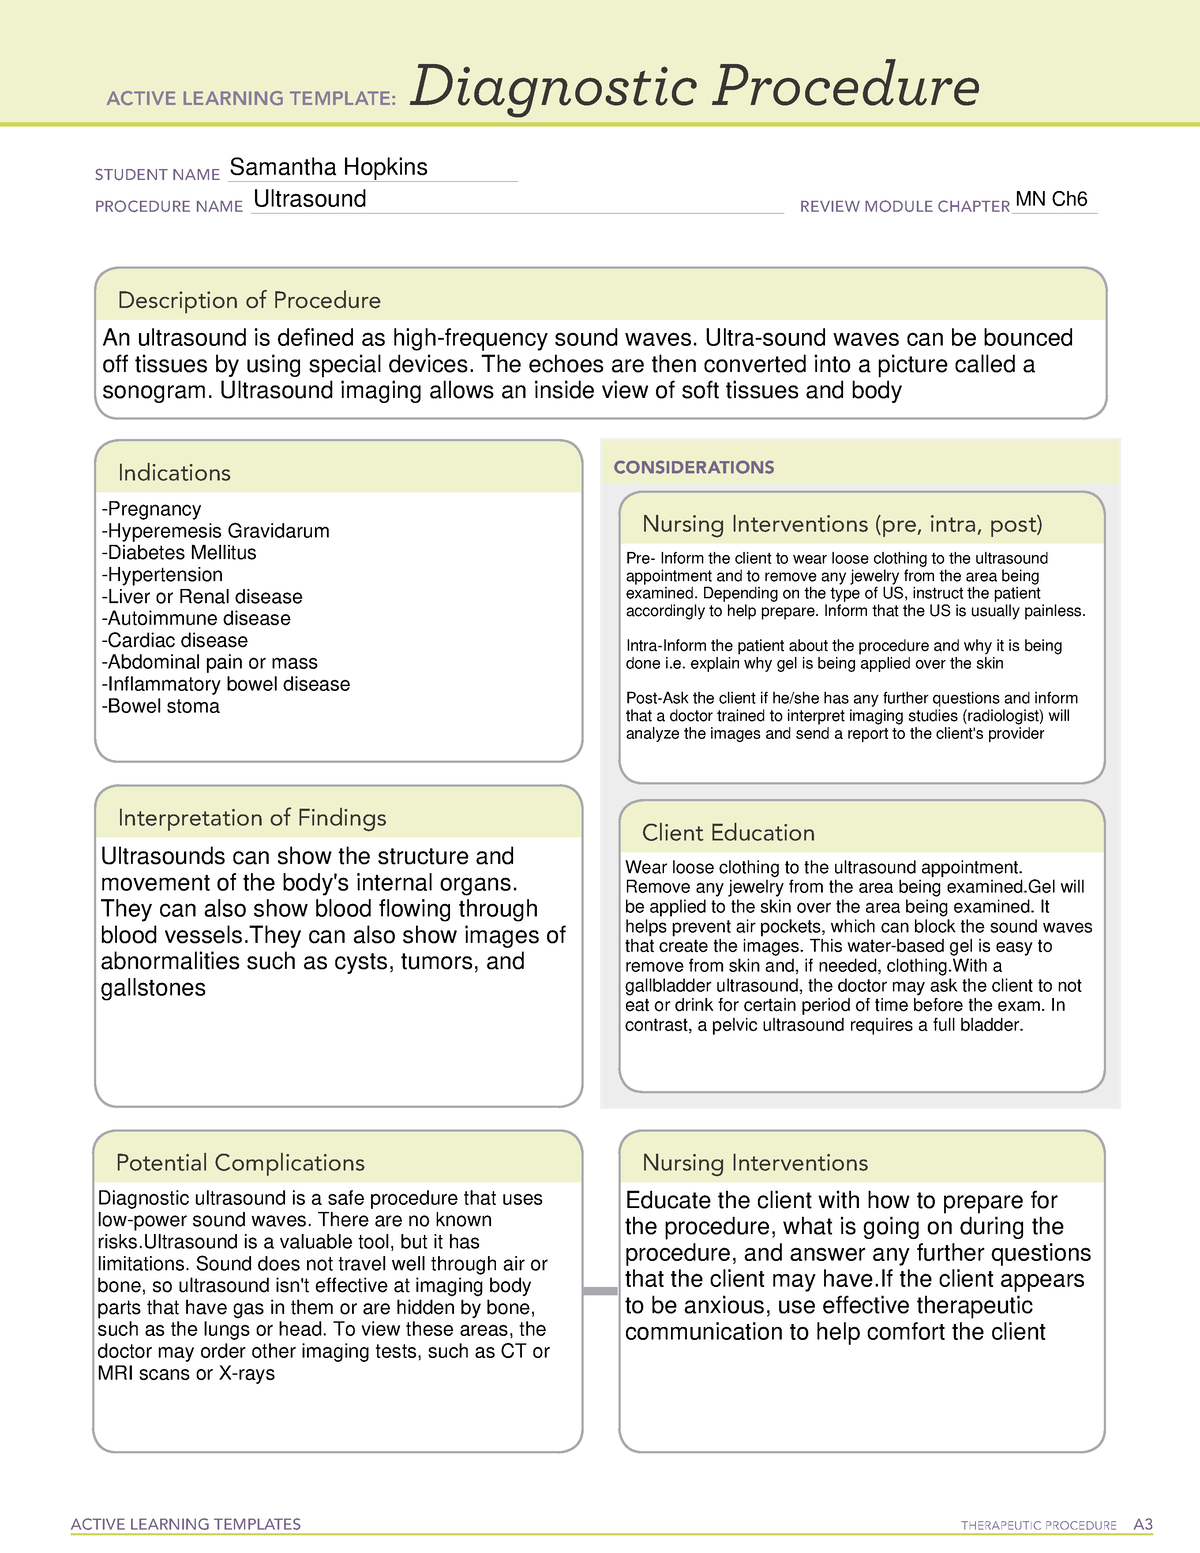 ATI Templates Medication and Diagnostic - ACTIVE LEARNING TEMPLATES ...